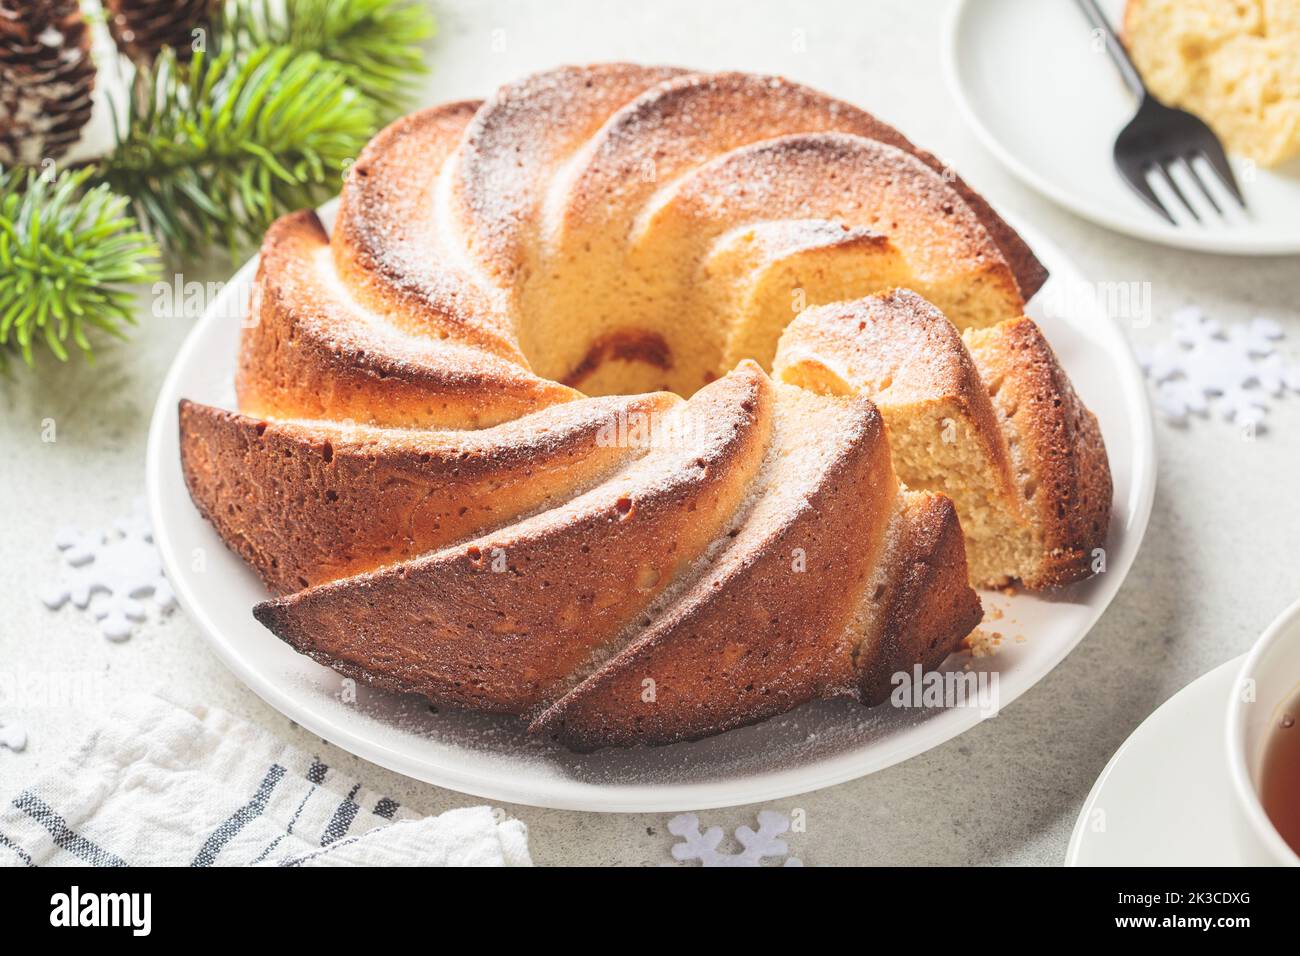 Christmas dessert, close-up. Vanilla pound cake with powdered sugar on a white plate, light gray background with Christmas tree branches. Stock Photo